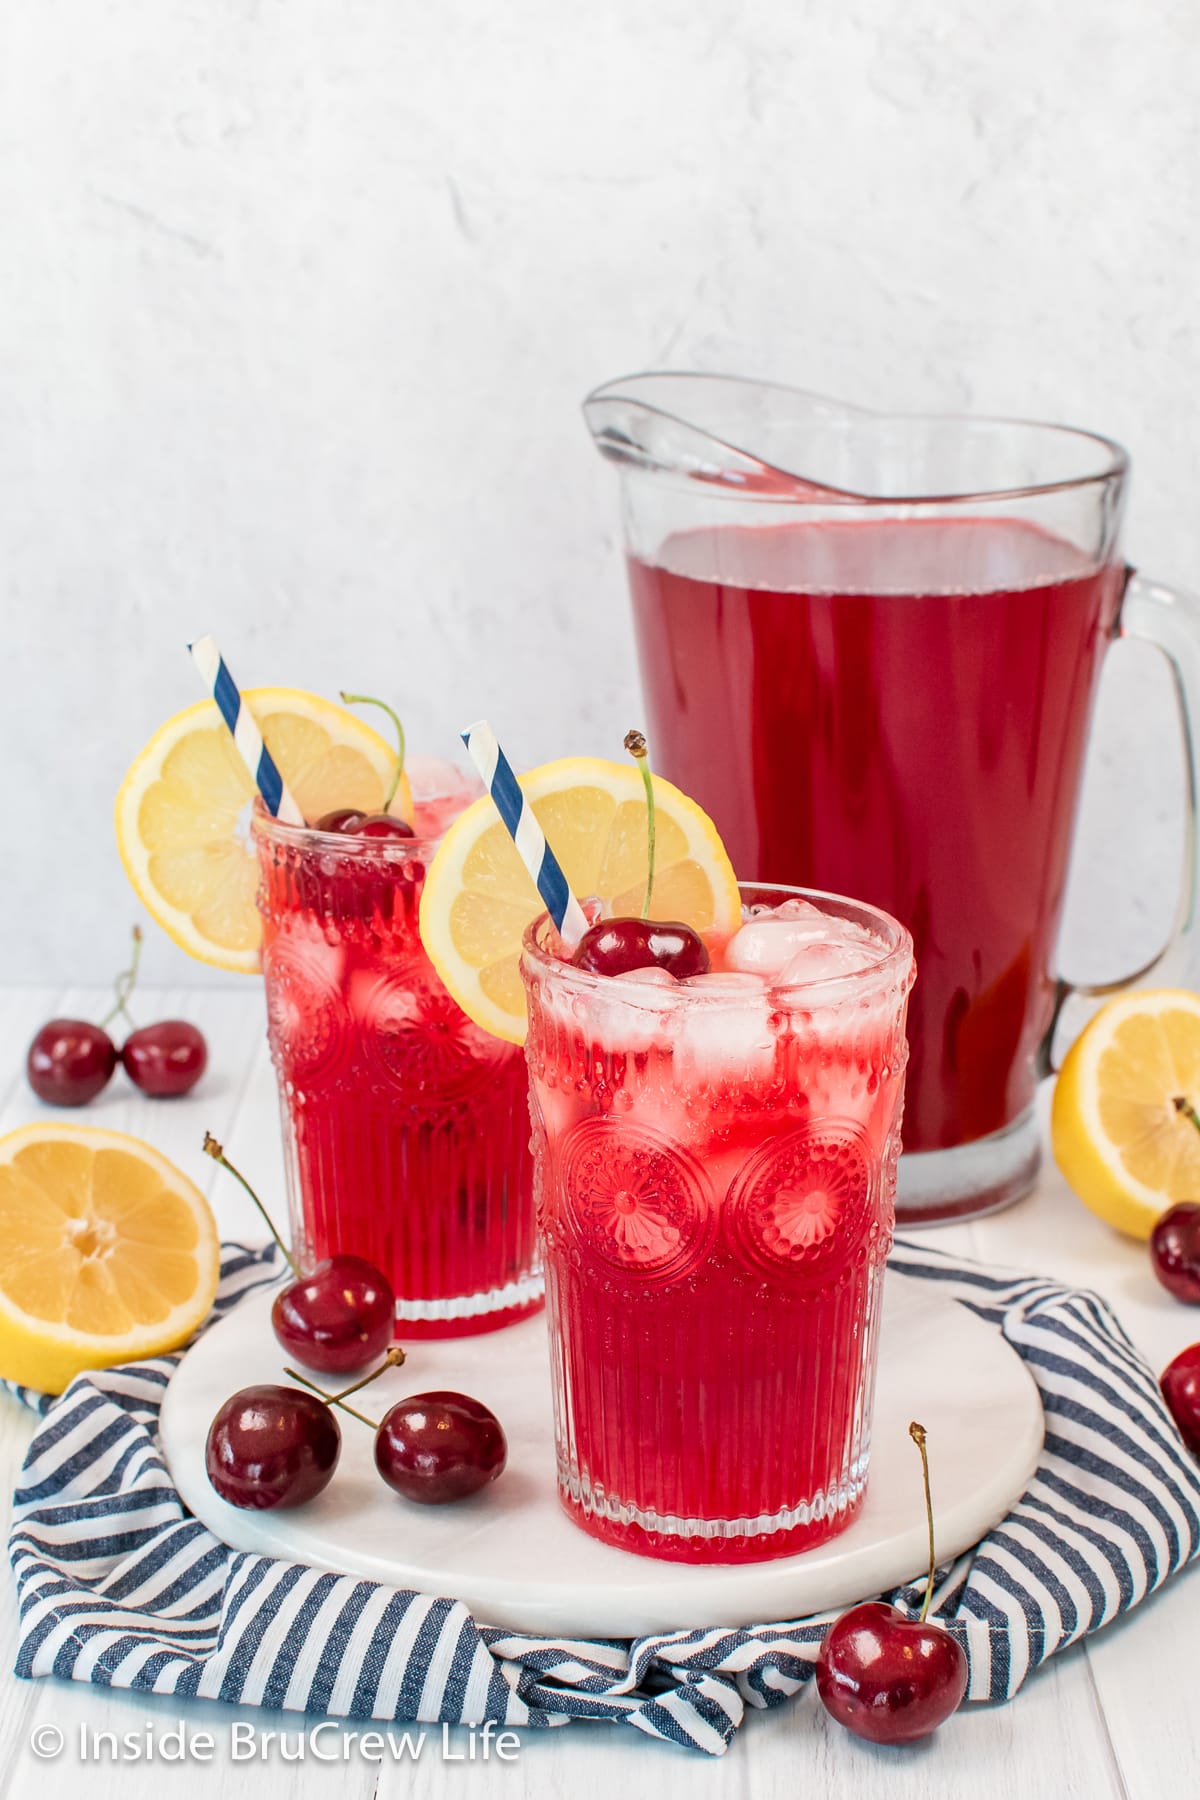 Two clear glasses filled with a red cherry lemonade and a lemon slice.